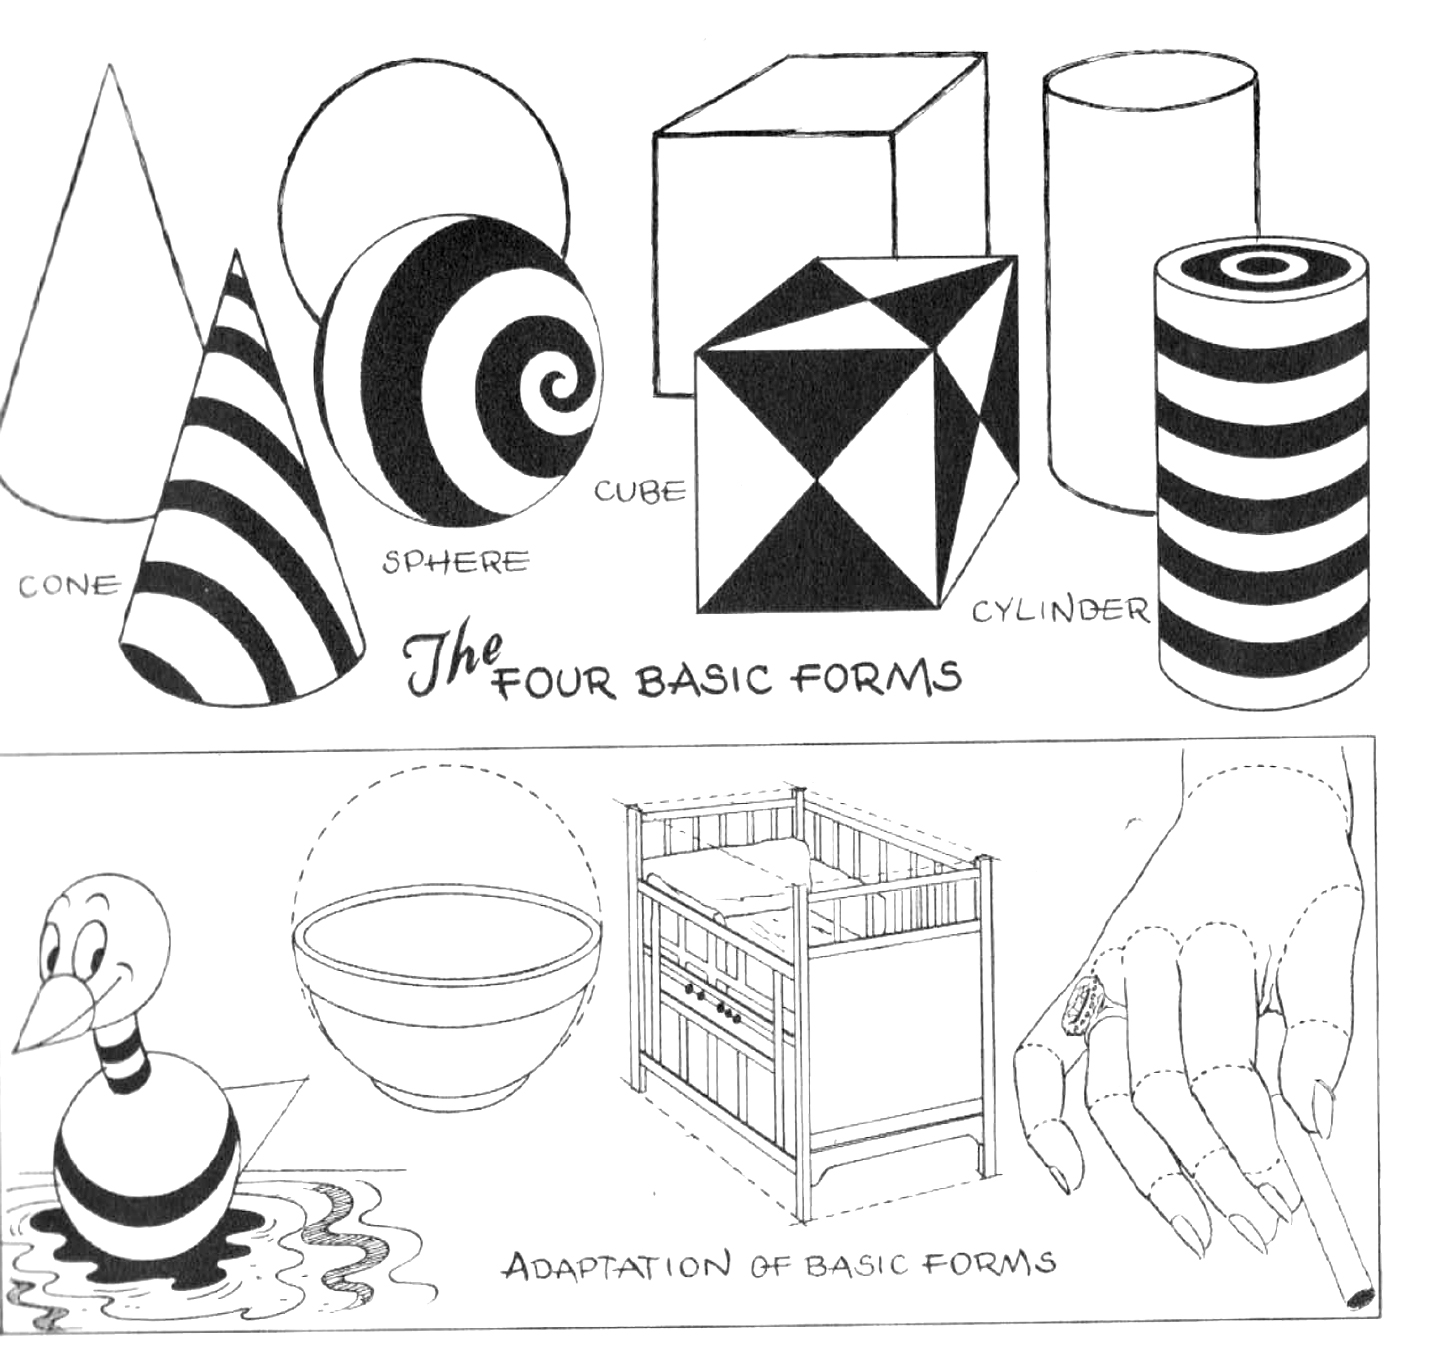 how to draw anything by using simple shapes - cone, sphere, cylinder, cone